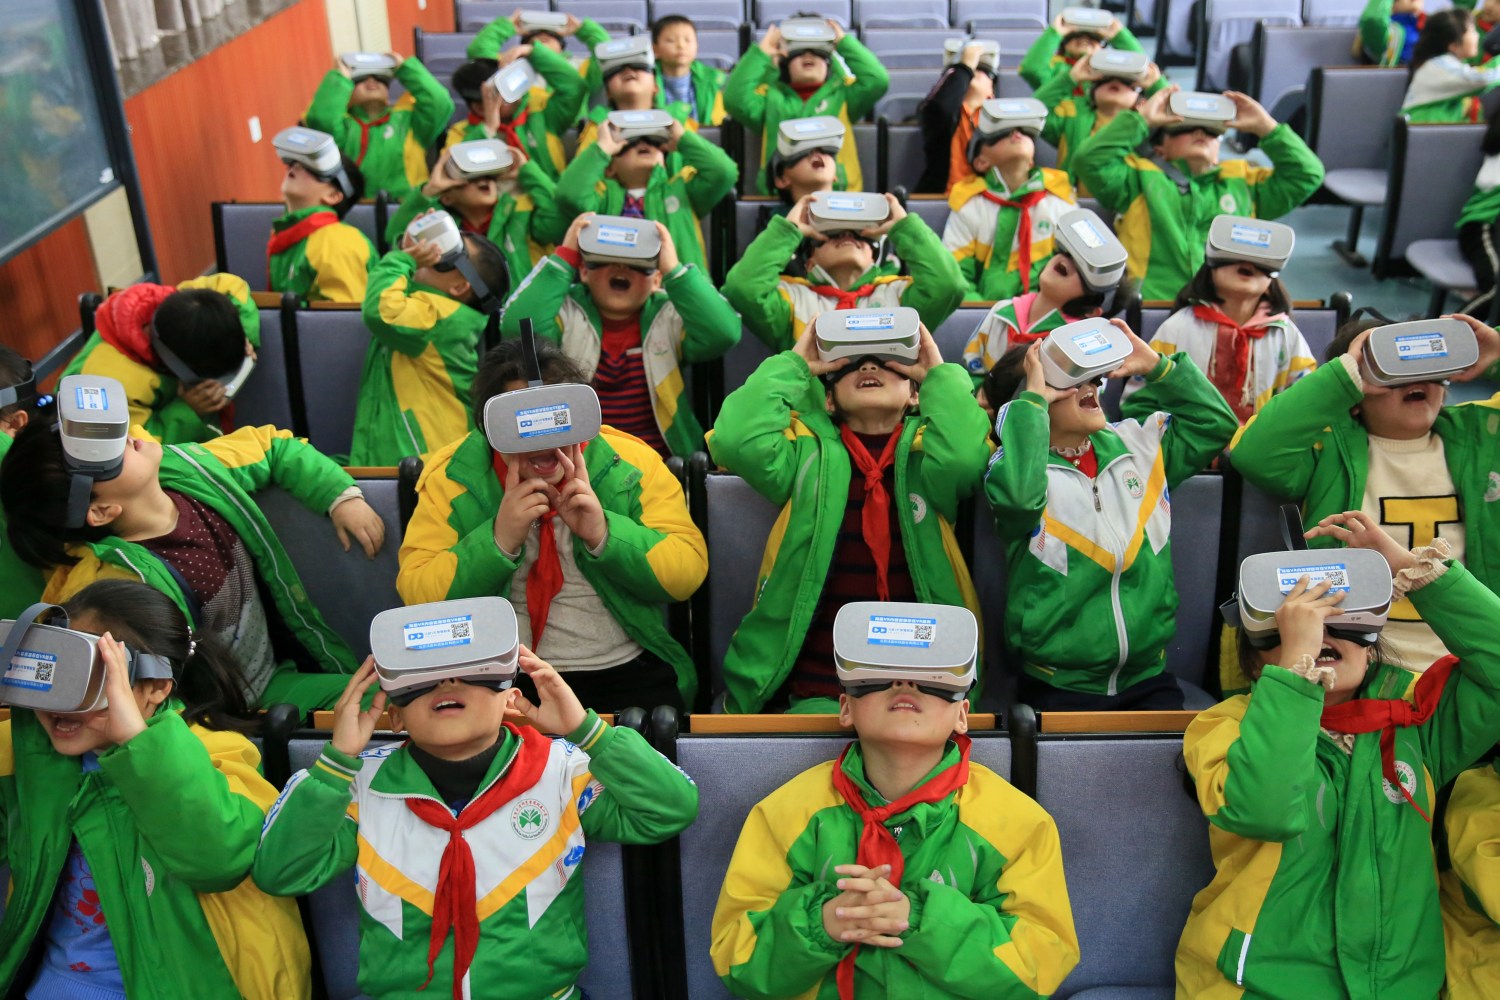 Primary school students wear virtual reality (VR) headsets inside a classroom in Xiangxi Tujia and Miao Autonomous Prefecture, Hunan province, China March 14, 2018. Picture taken March 14, 2018. REUTERS/Stringer  ATTENTION EDITORS - THIS IMAGE WAS PROVIDED BY A THIRD PARTY. CHINA OUT. - RC16E4321880